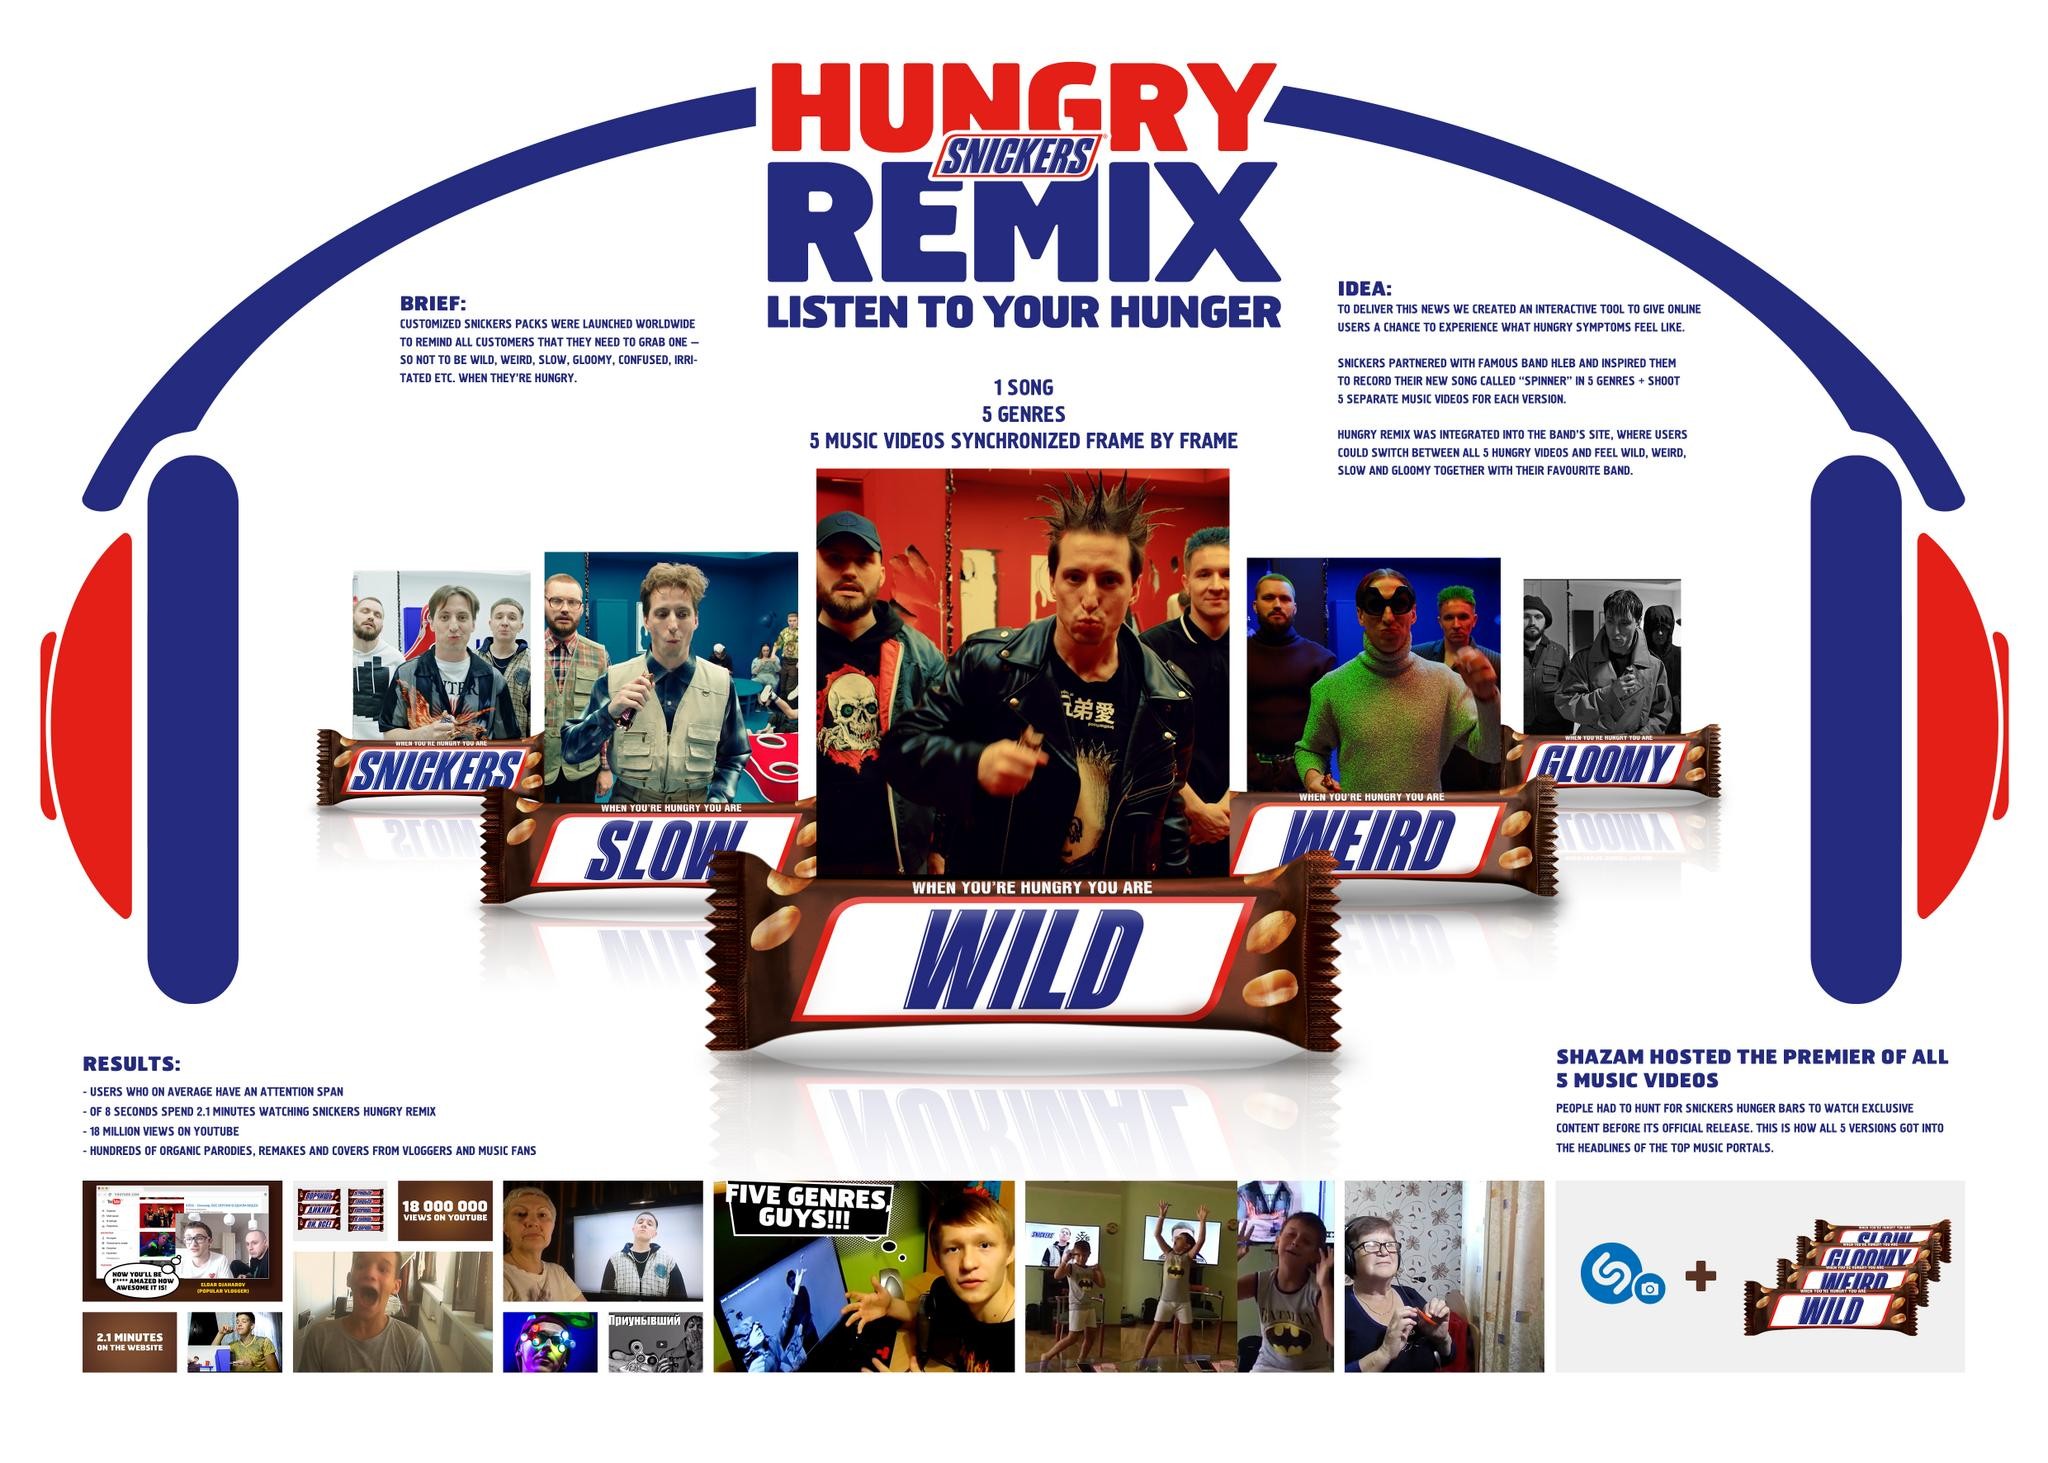 SNICKERS HUNGRY REMIX